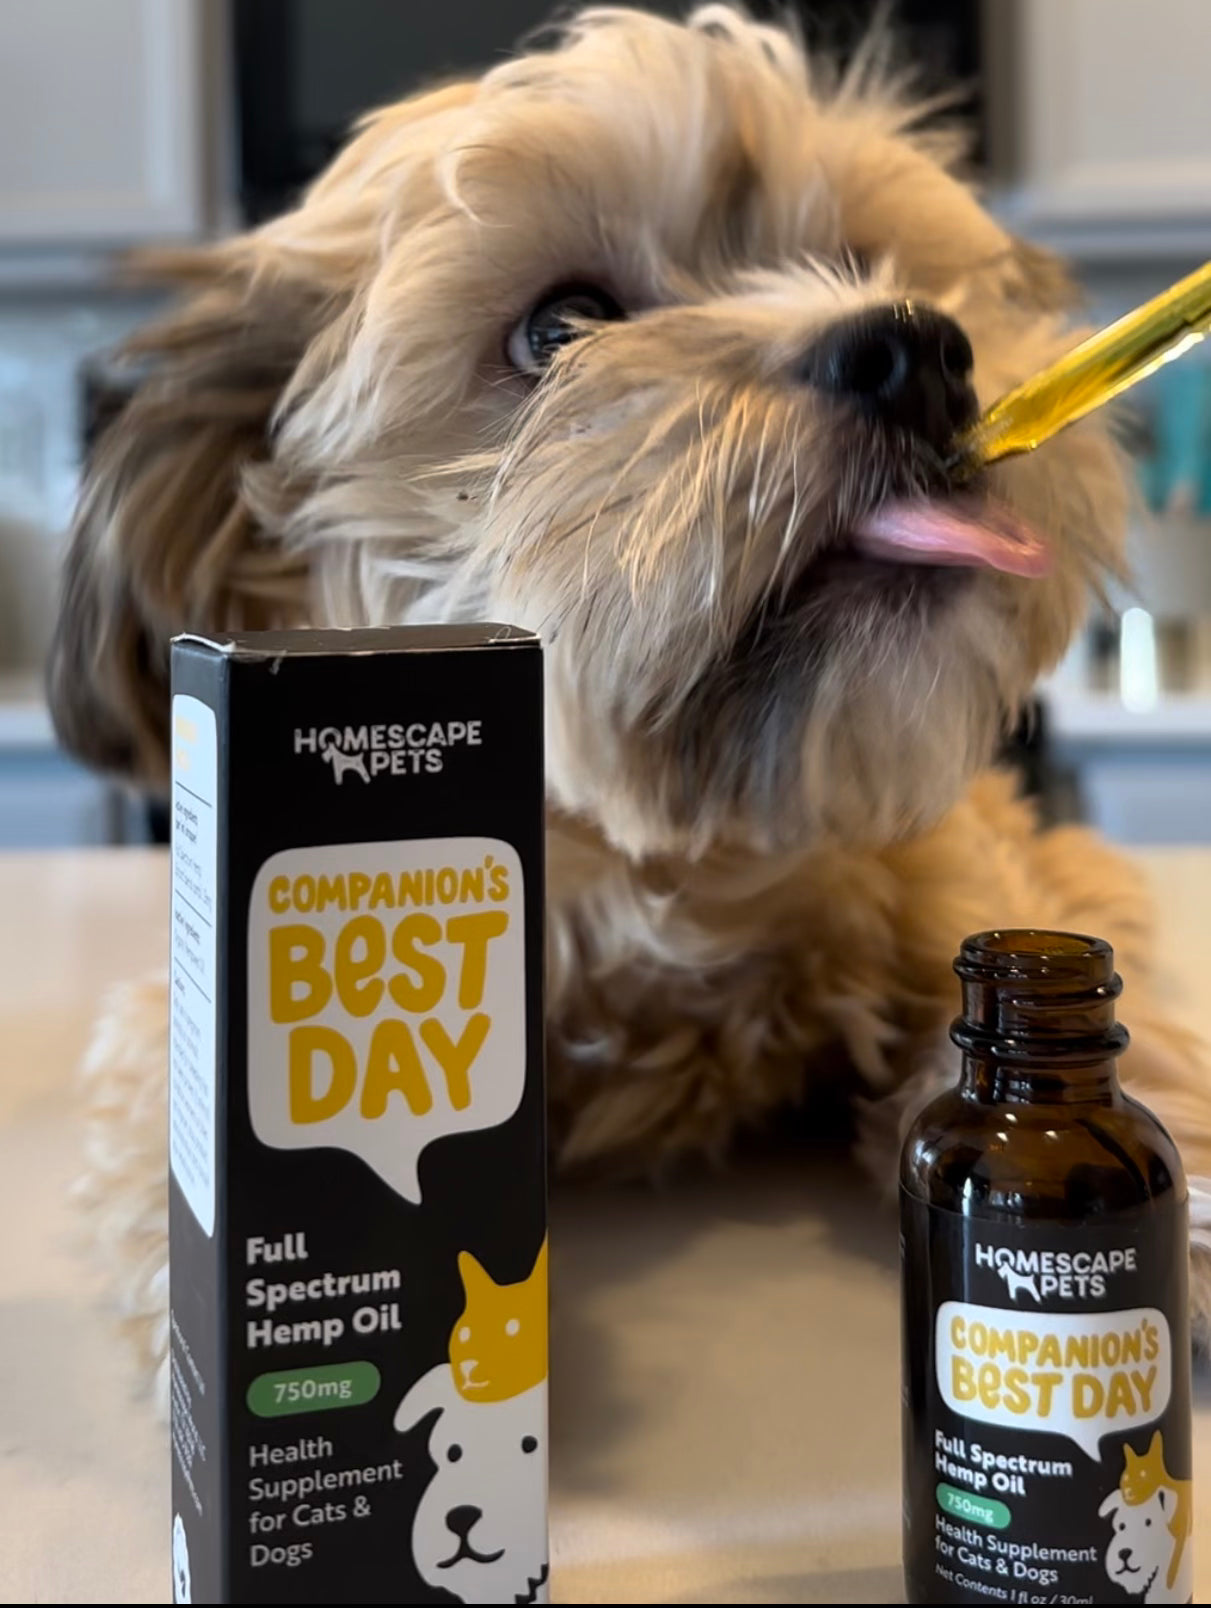 Small brown dog taking Companion's Best Day oil on its tongue. The product box and bottle are in the foreground. | Homescape Pets